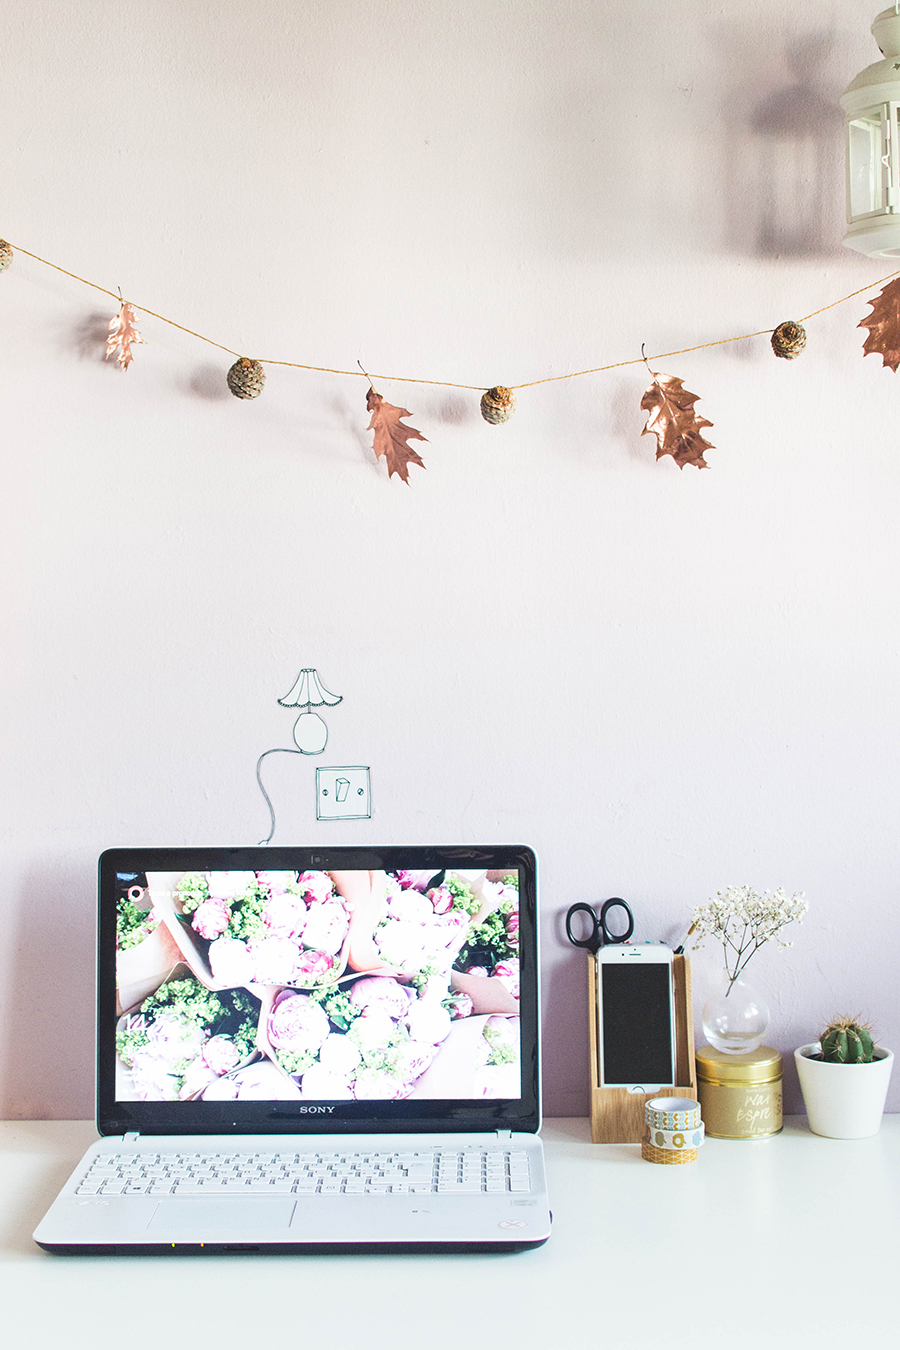 Easy DIY Autumn Garland Tutorial - perfect for your workspace!